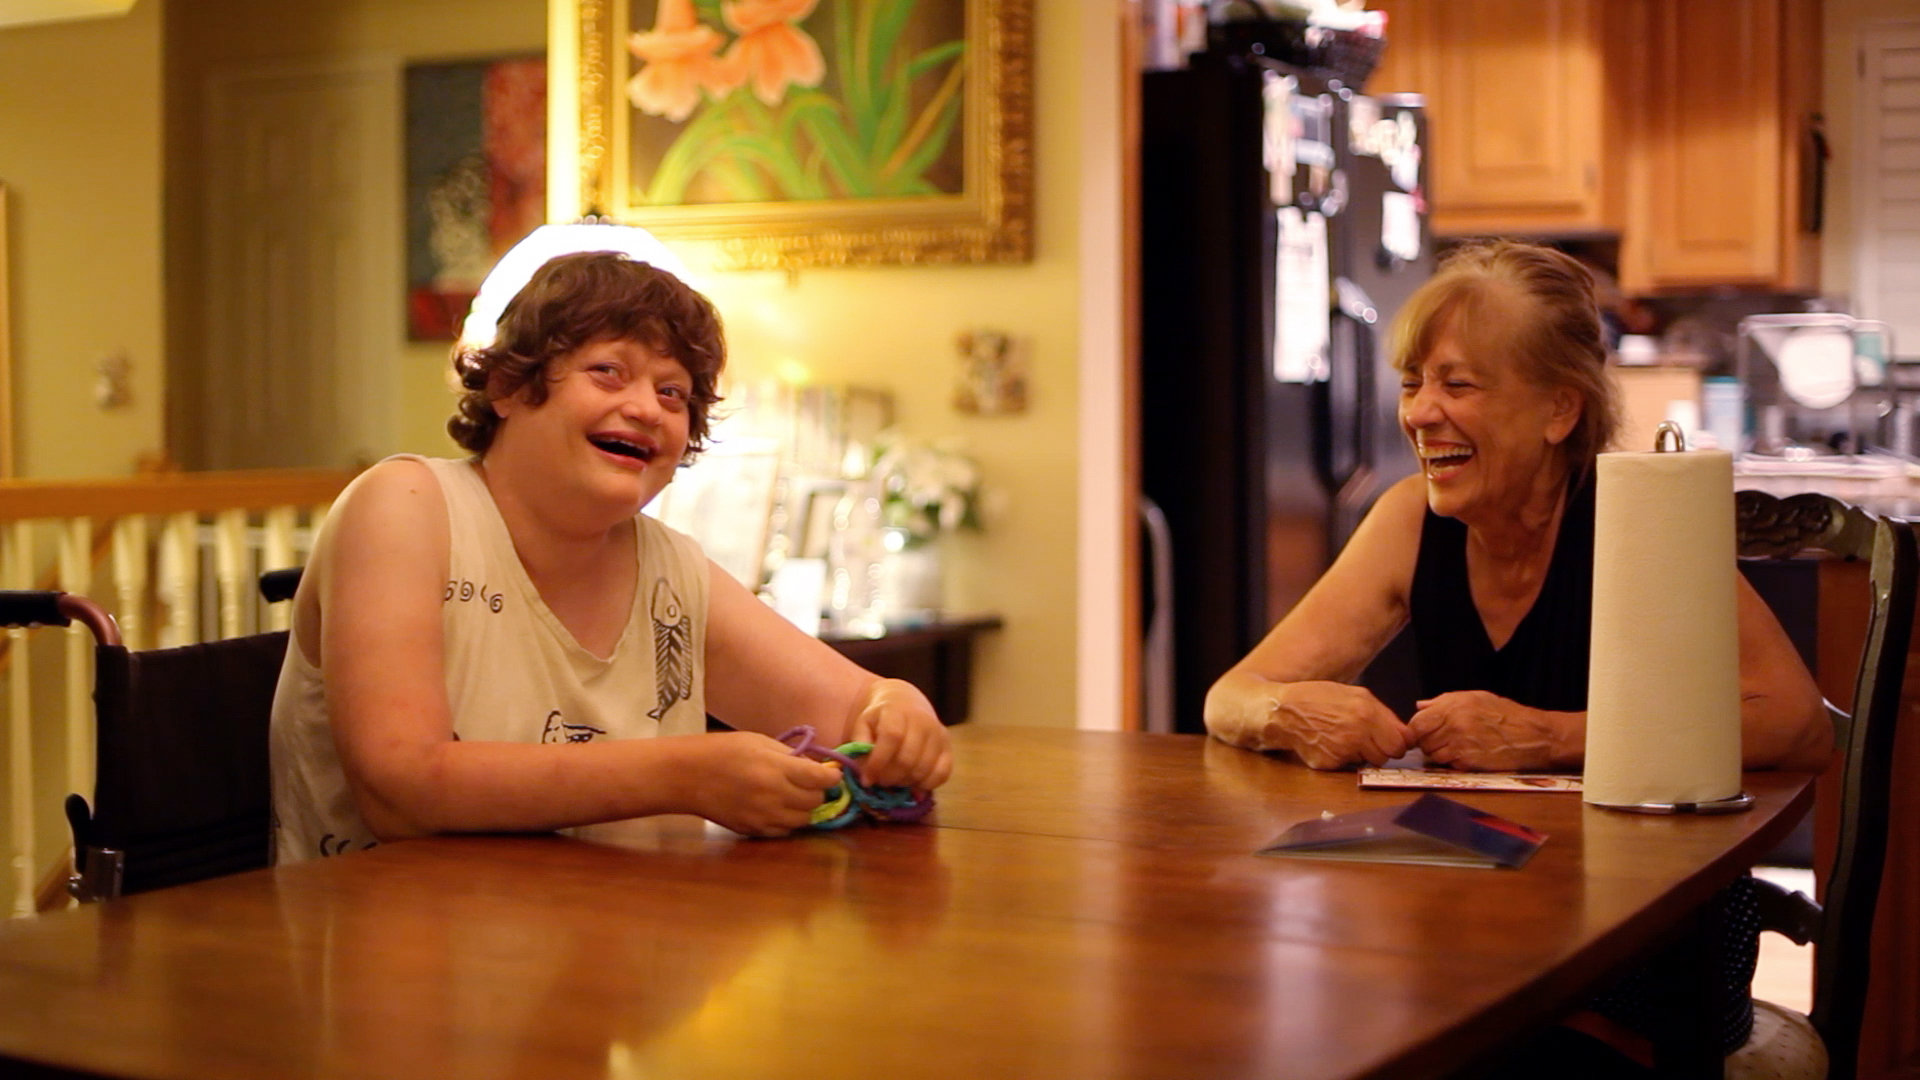 Still of Jill Kohfield and Missy Bosch in The Quality of Life (2015)